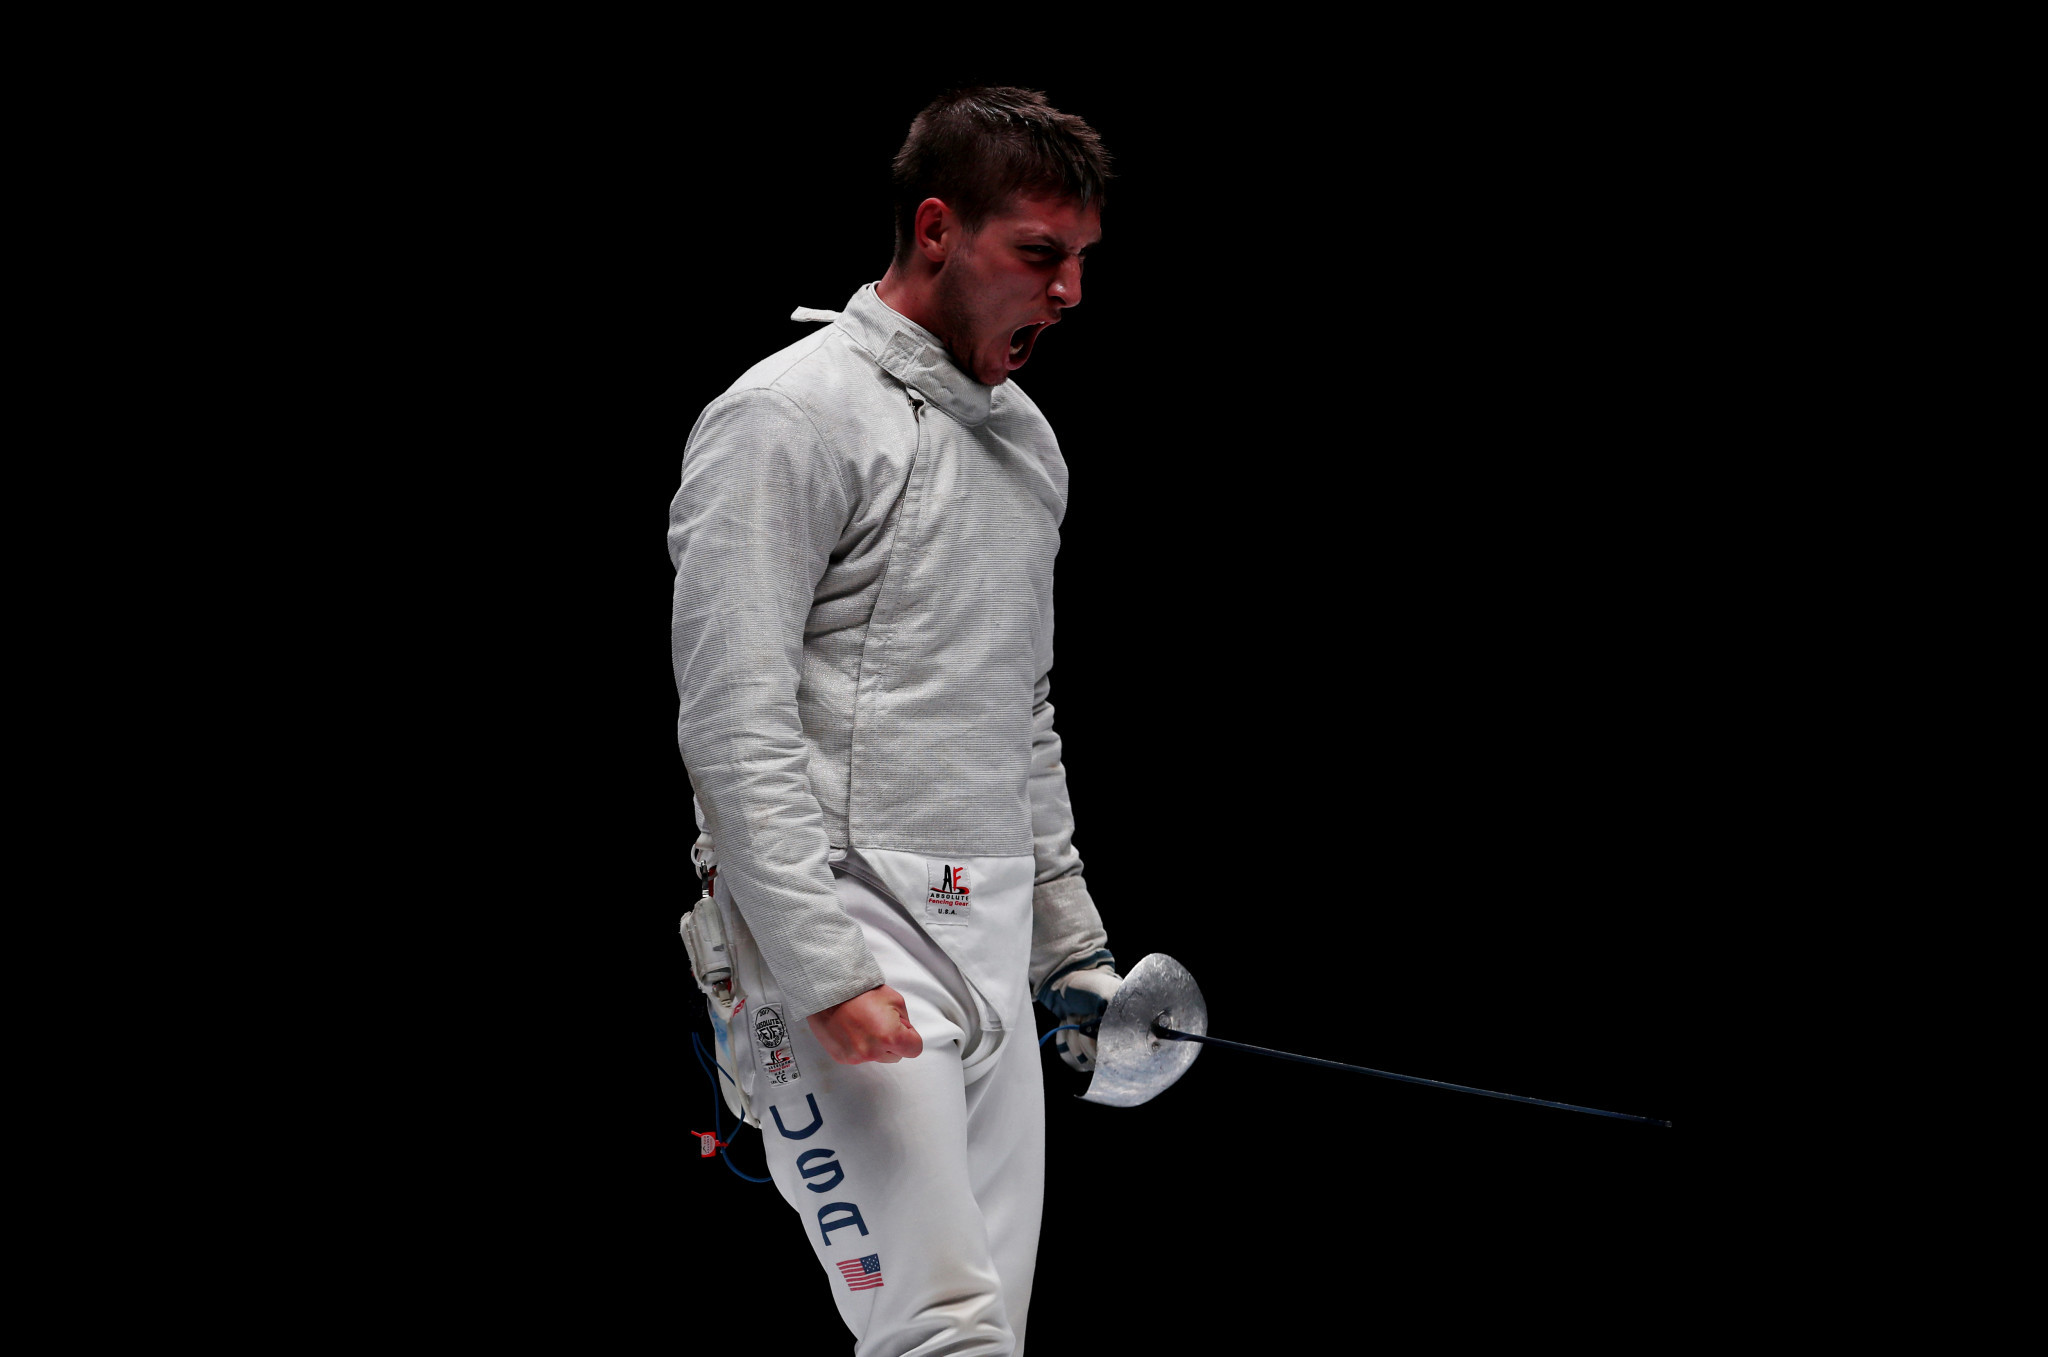 Dershwitz and Ross strike gold as United States dominate opening day of Pan American Fencing Championships